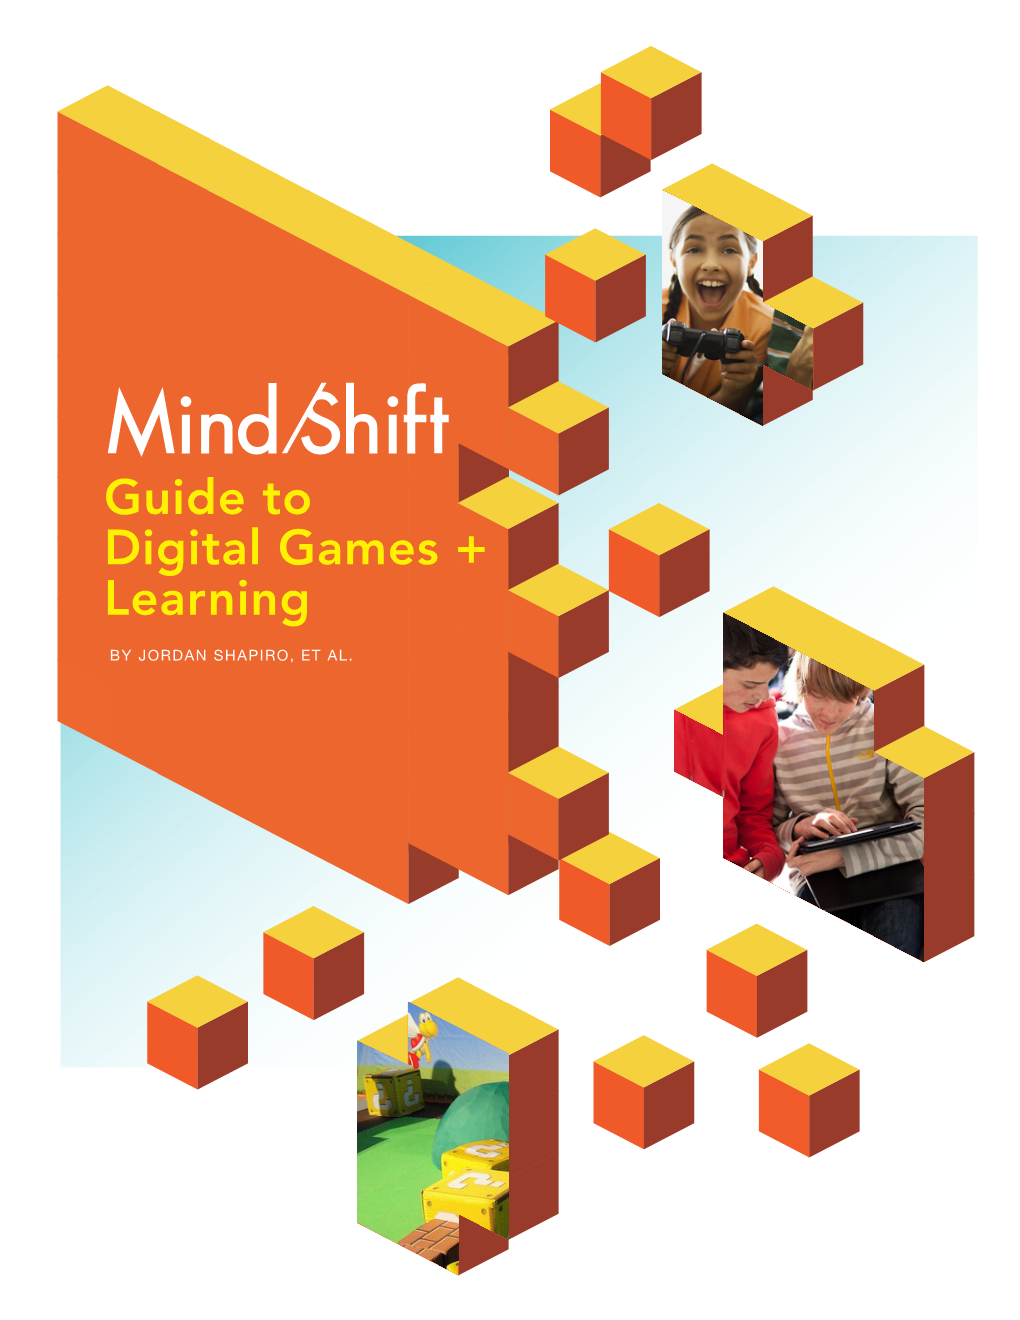 The Mindshift Guide to Digital Games and Learning